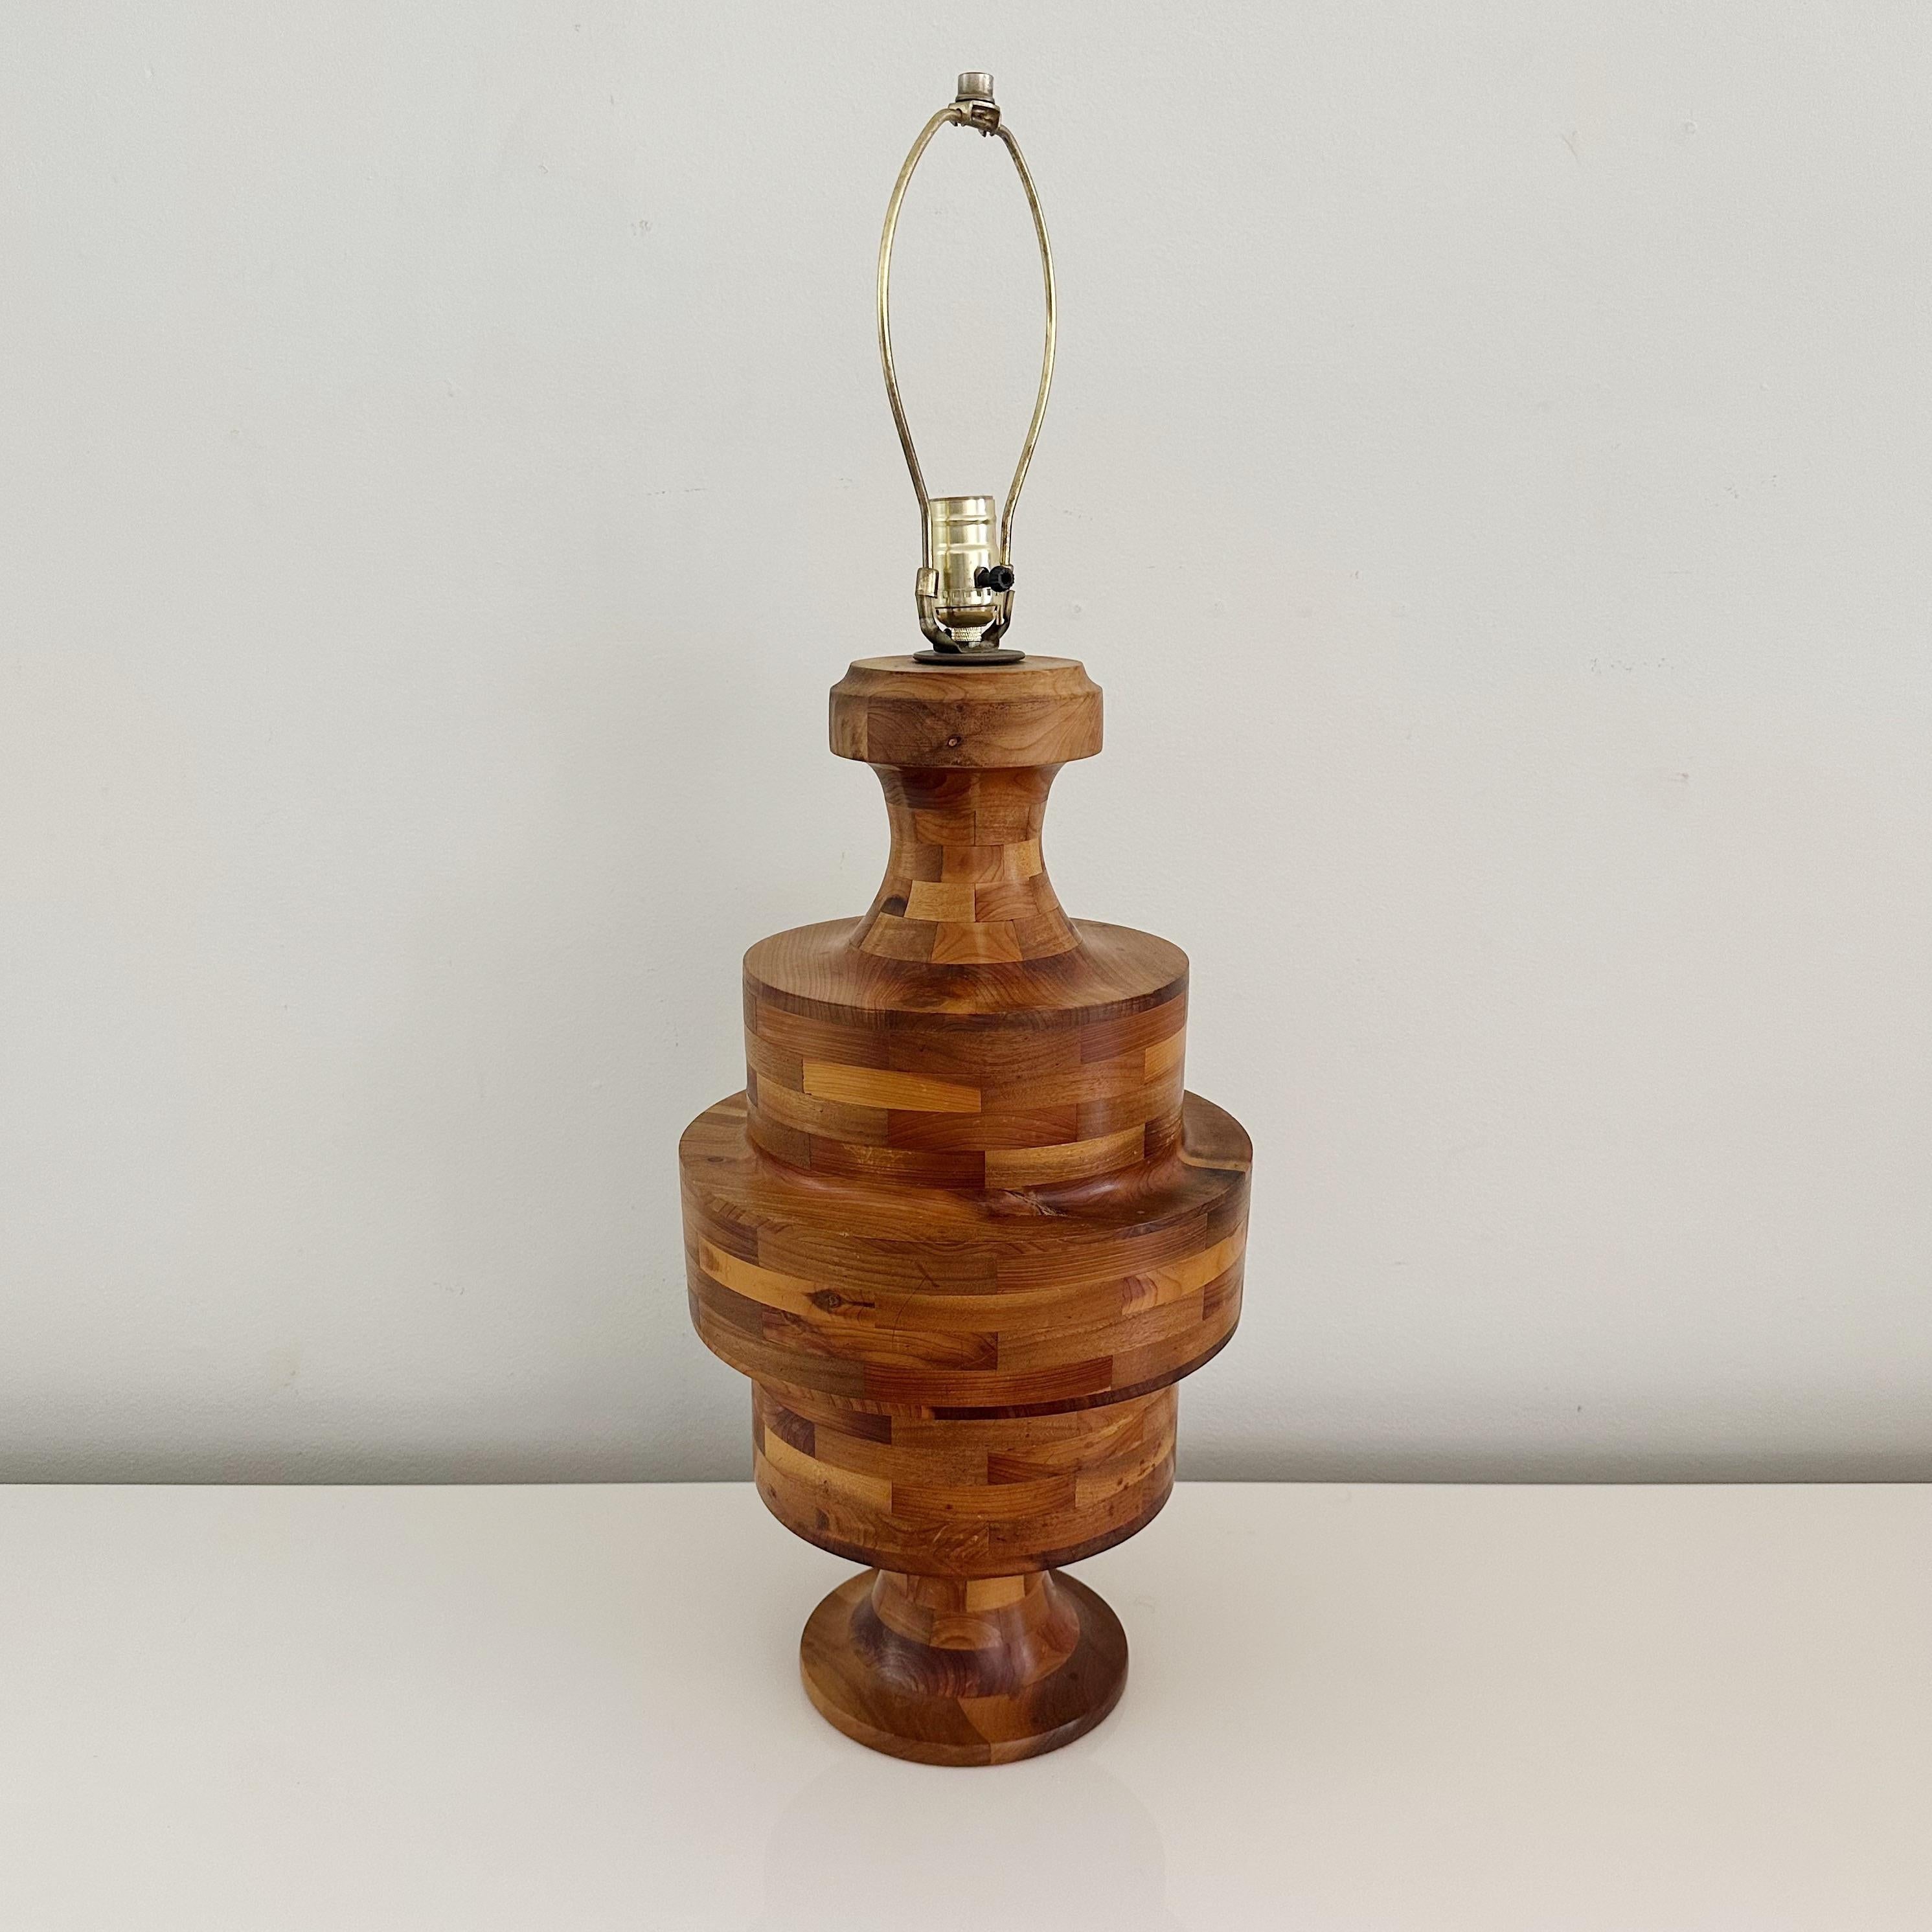 Vintage Marquetry Hand-Turned Lathe Block Lamp, Crafted from Various Woods from the 1970s with a Striking Stacked Wood Color Pattern

Handcrafted marquetry lamp, expertly created from a stunning selection of different wood types. Crafted using